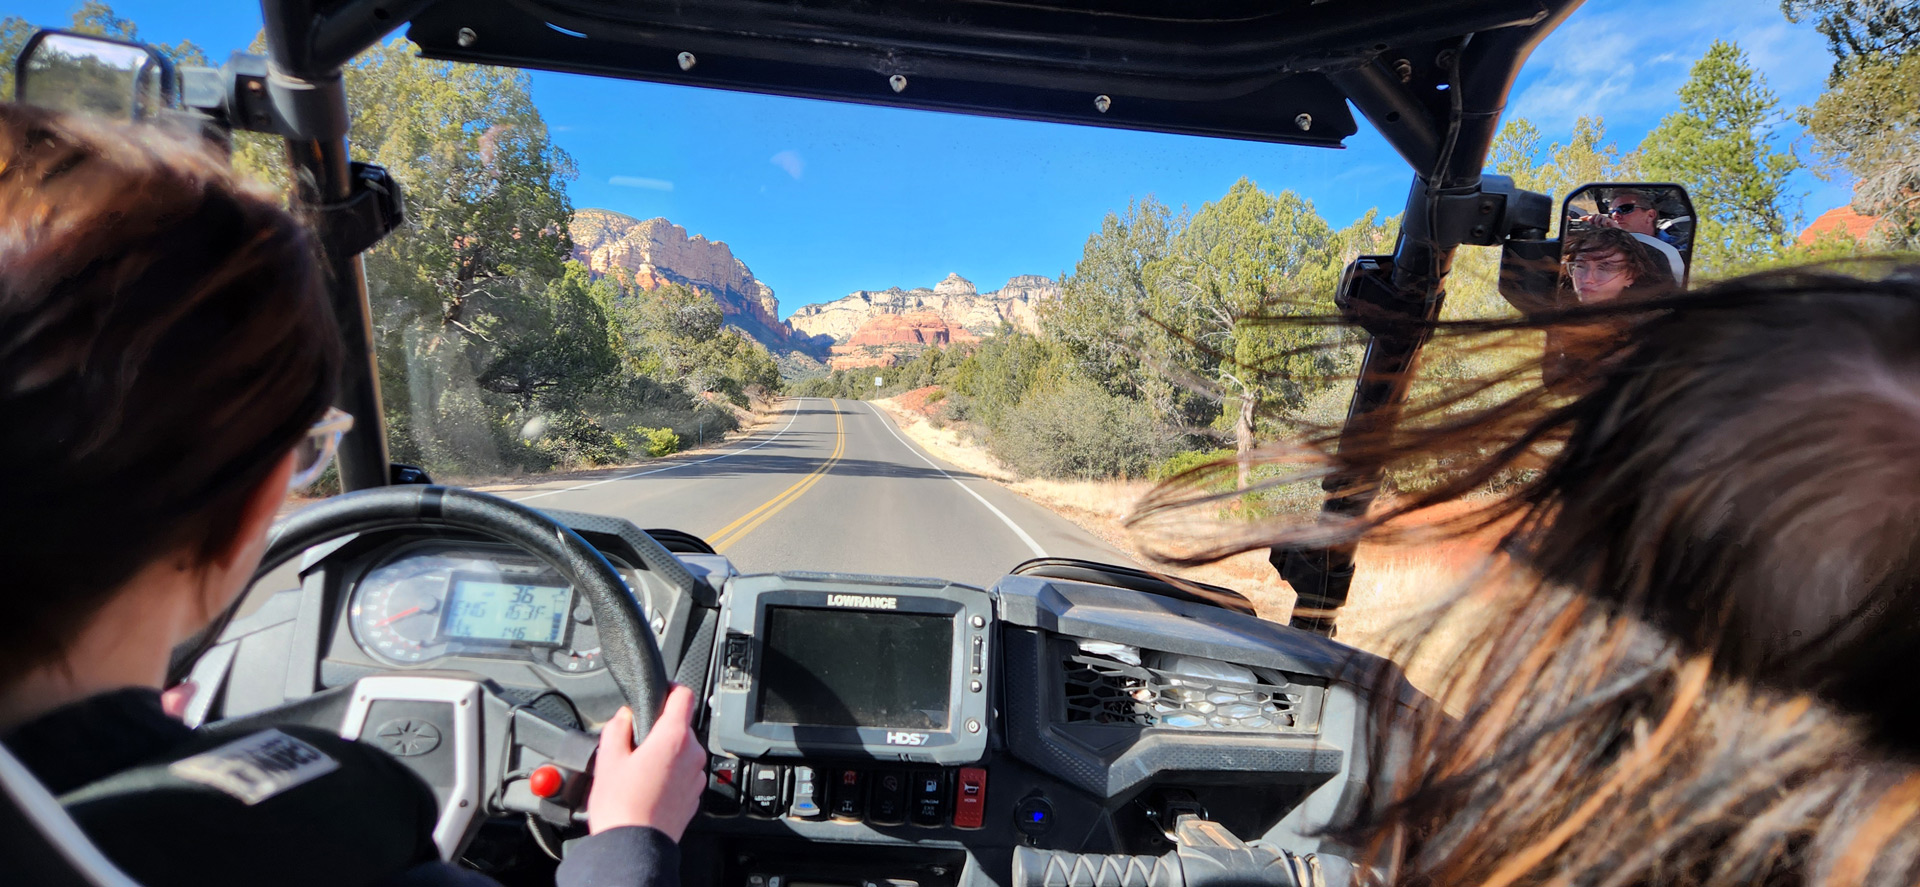 View from the back seat of an Outback ATV Rental in Sedona